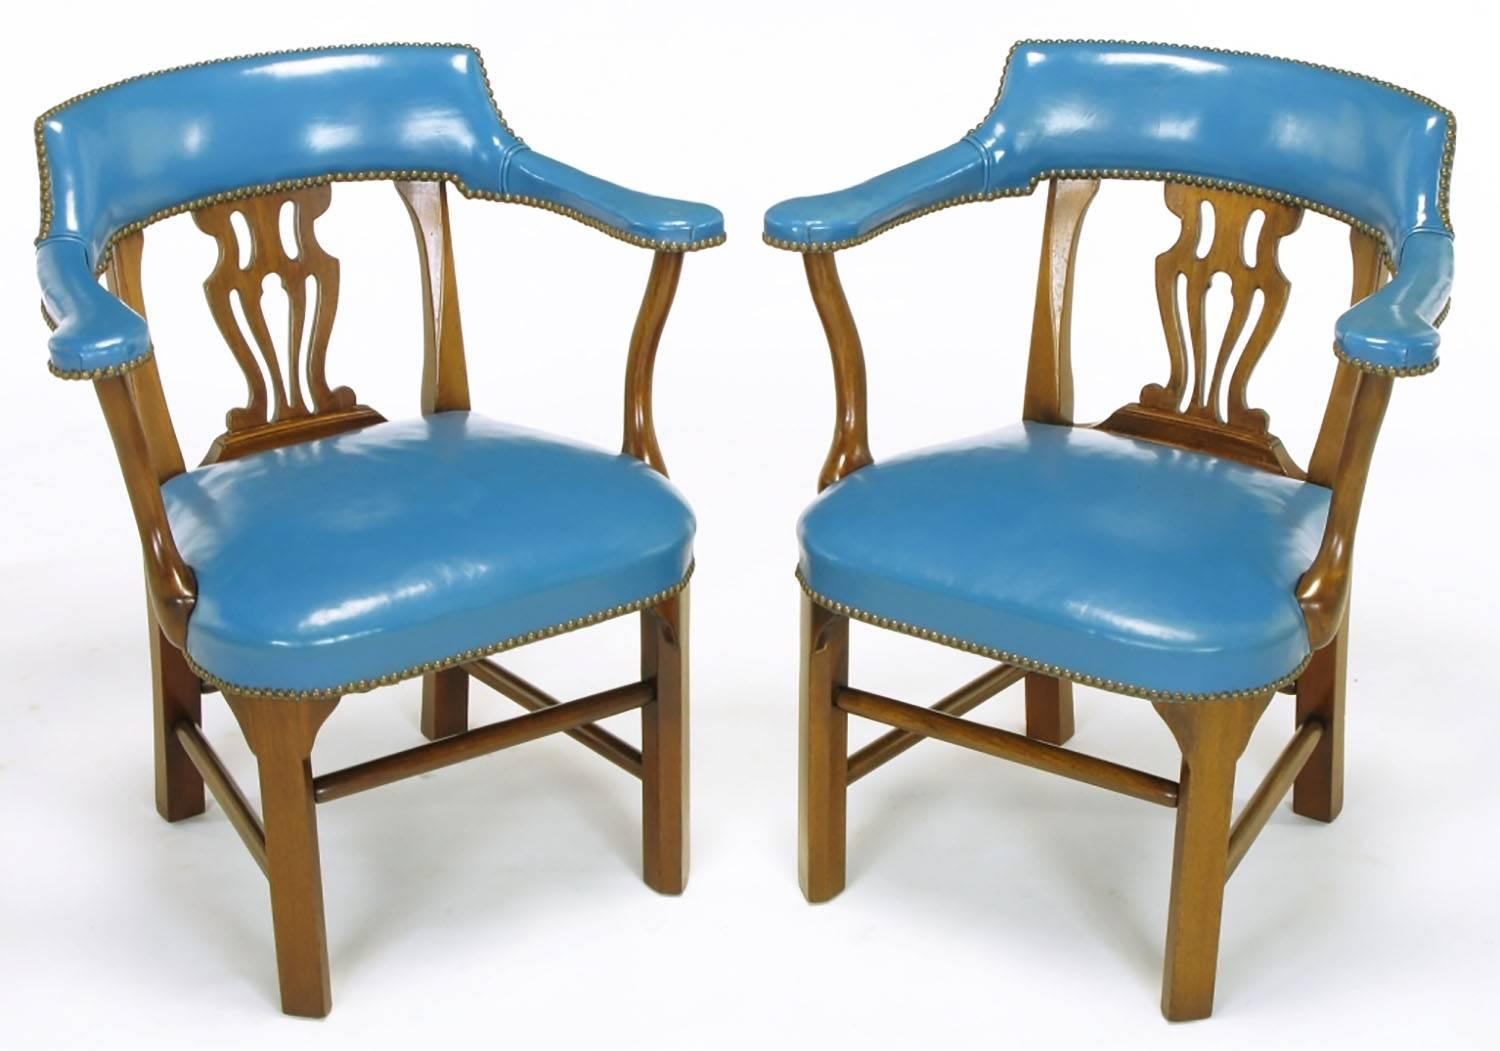 Pair of Chippendale influenced armchairs from Barnard & Simonds, Rochester, NY. Cadet blue leather wrapped arms, back as well as seat with brass nailhead details. Mahogany frames have canted front legs, Chippendale style open back and four part